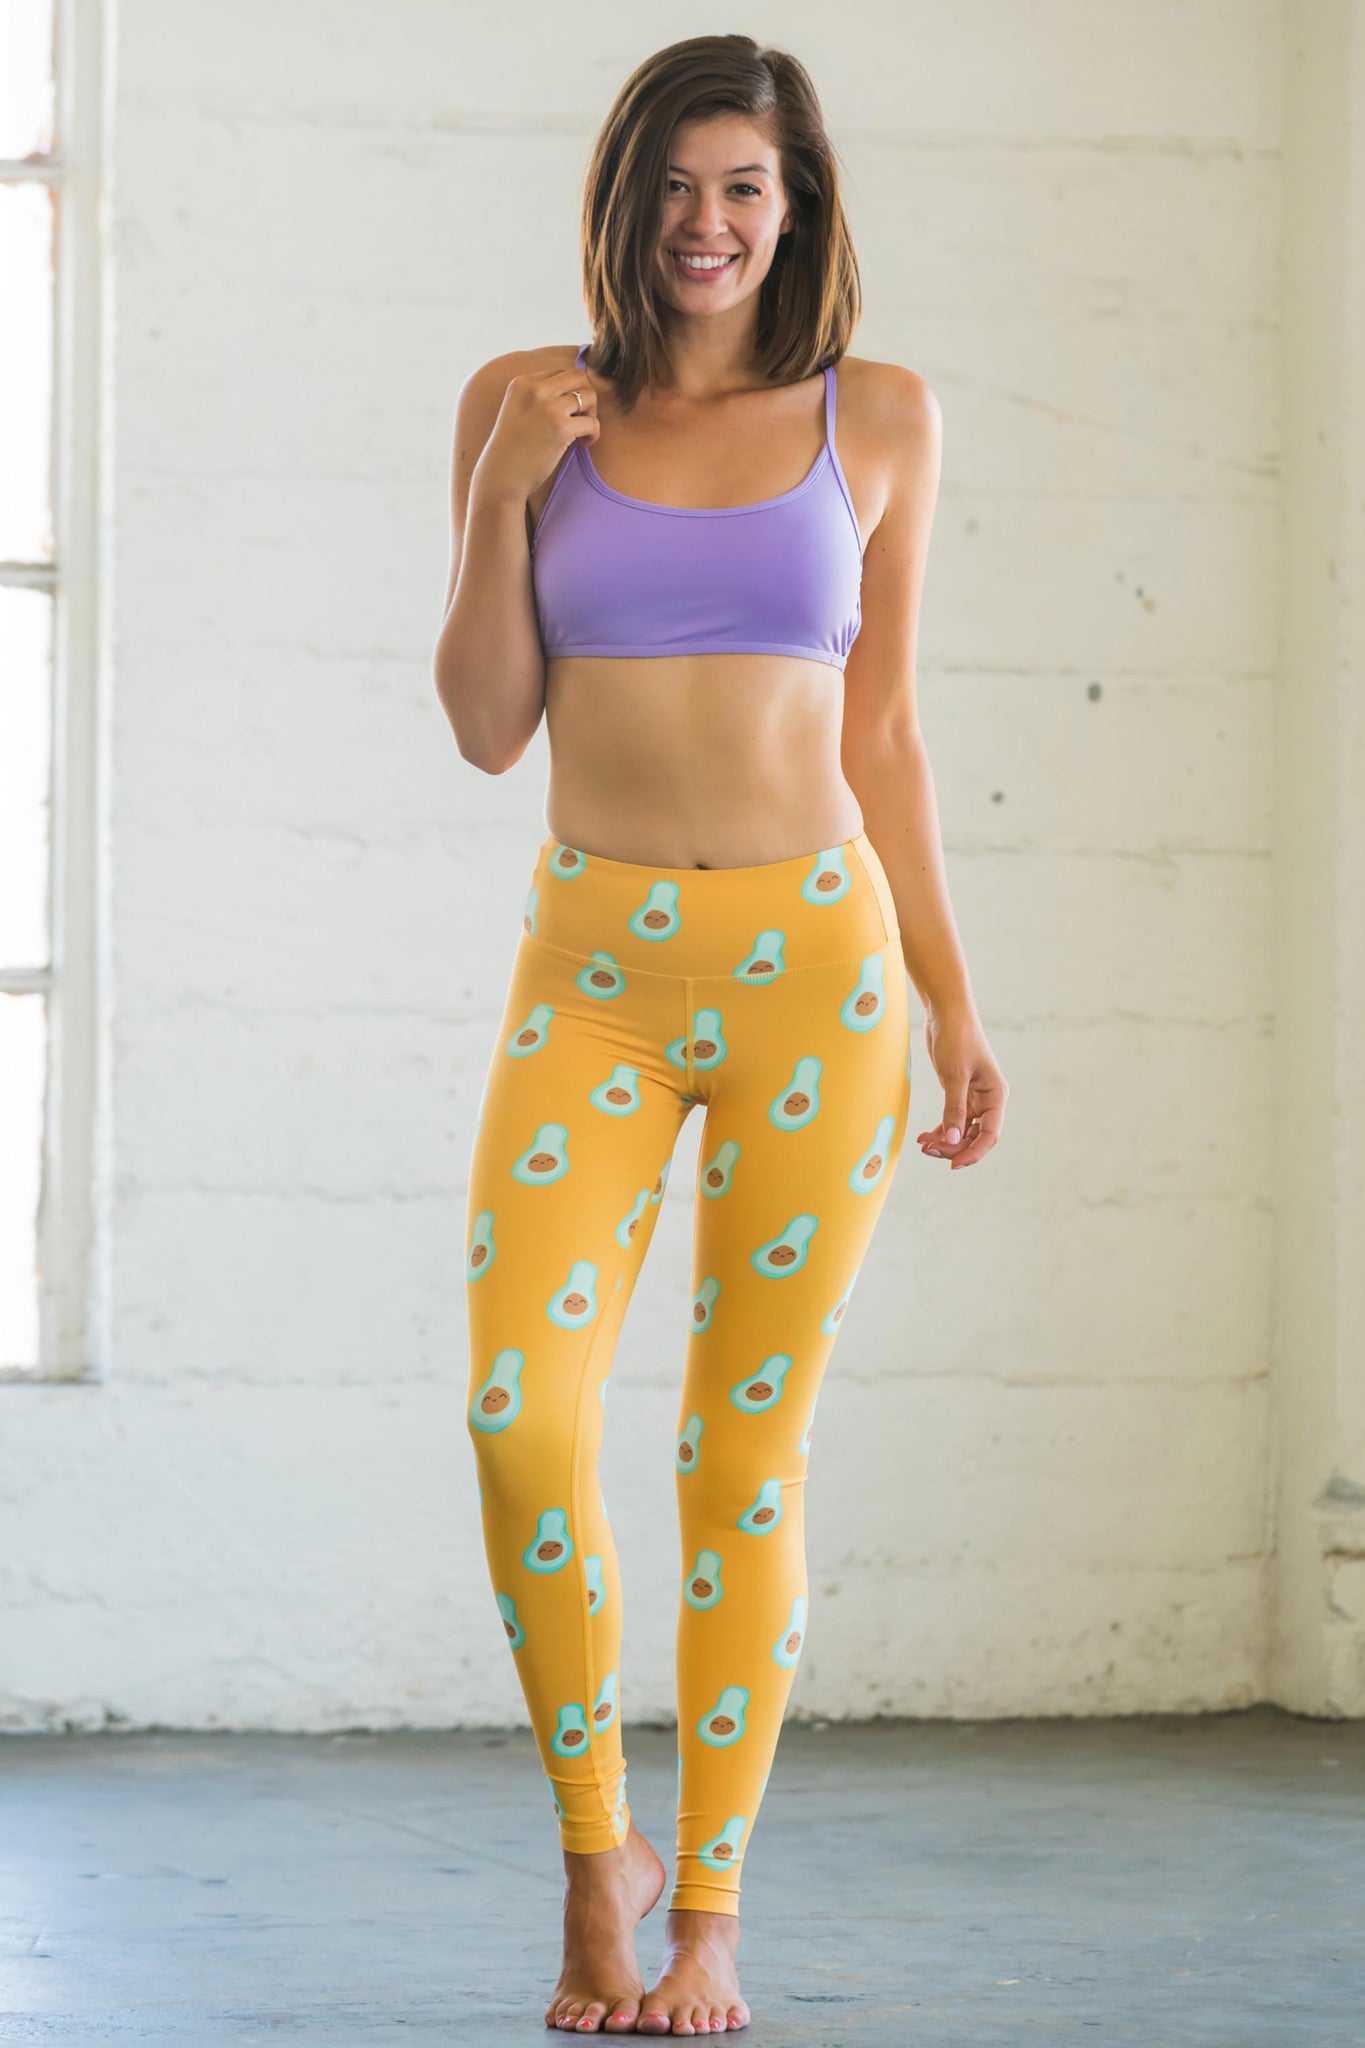 Floral and Stripes from Flexi Lexi Fitness